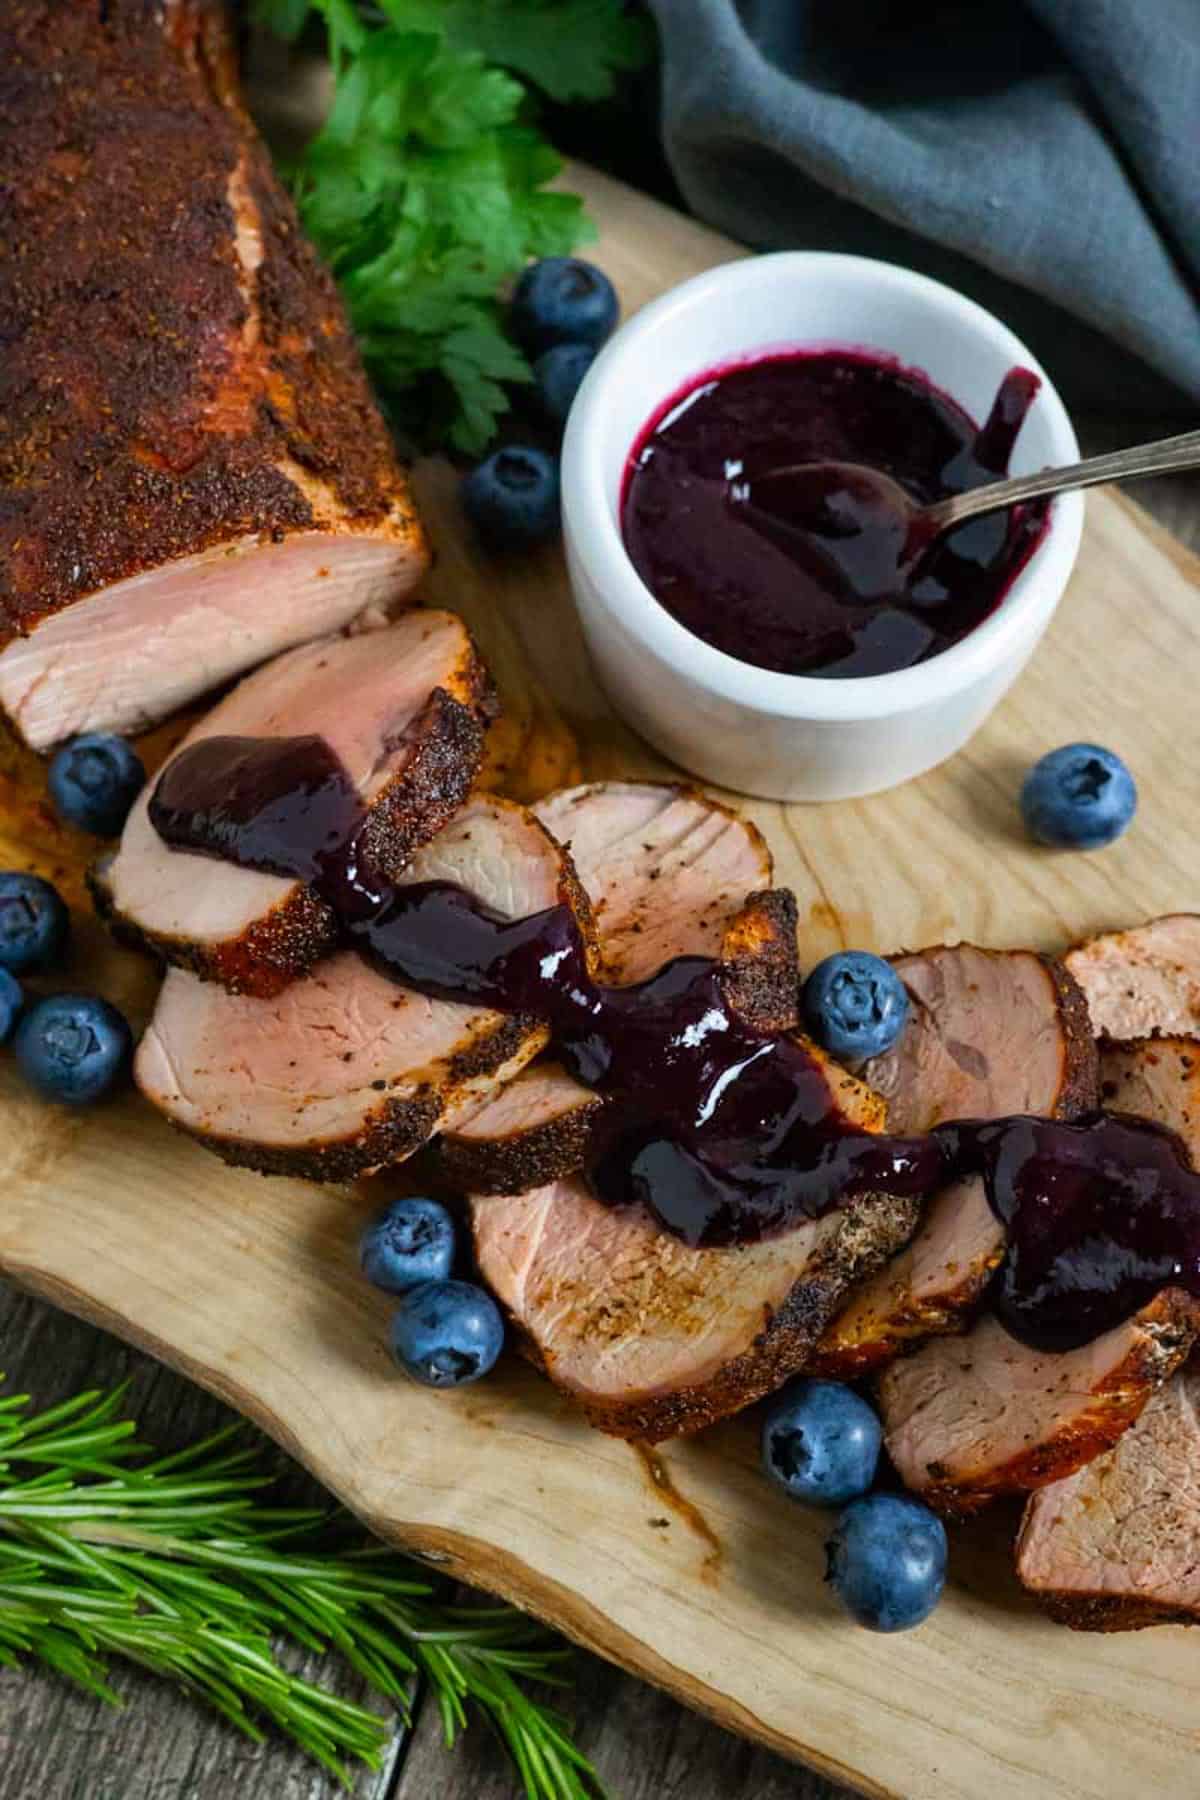 Slices of smoked pork tenderloin on a board with blueberry bbq sauce drizzled on them.